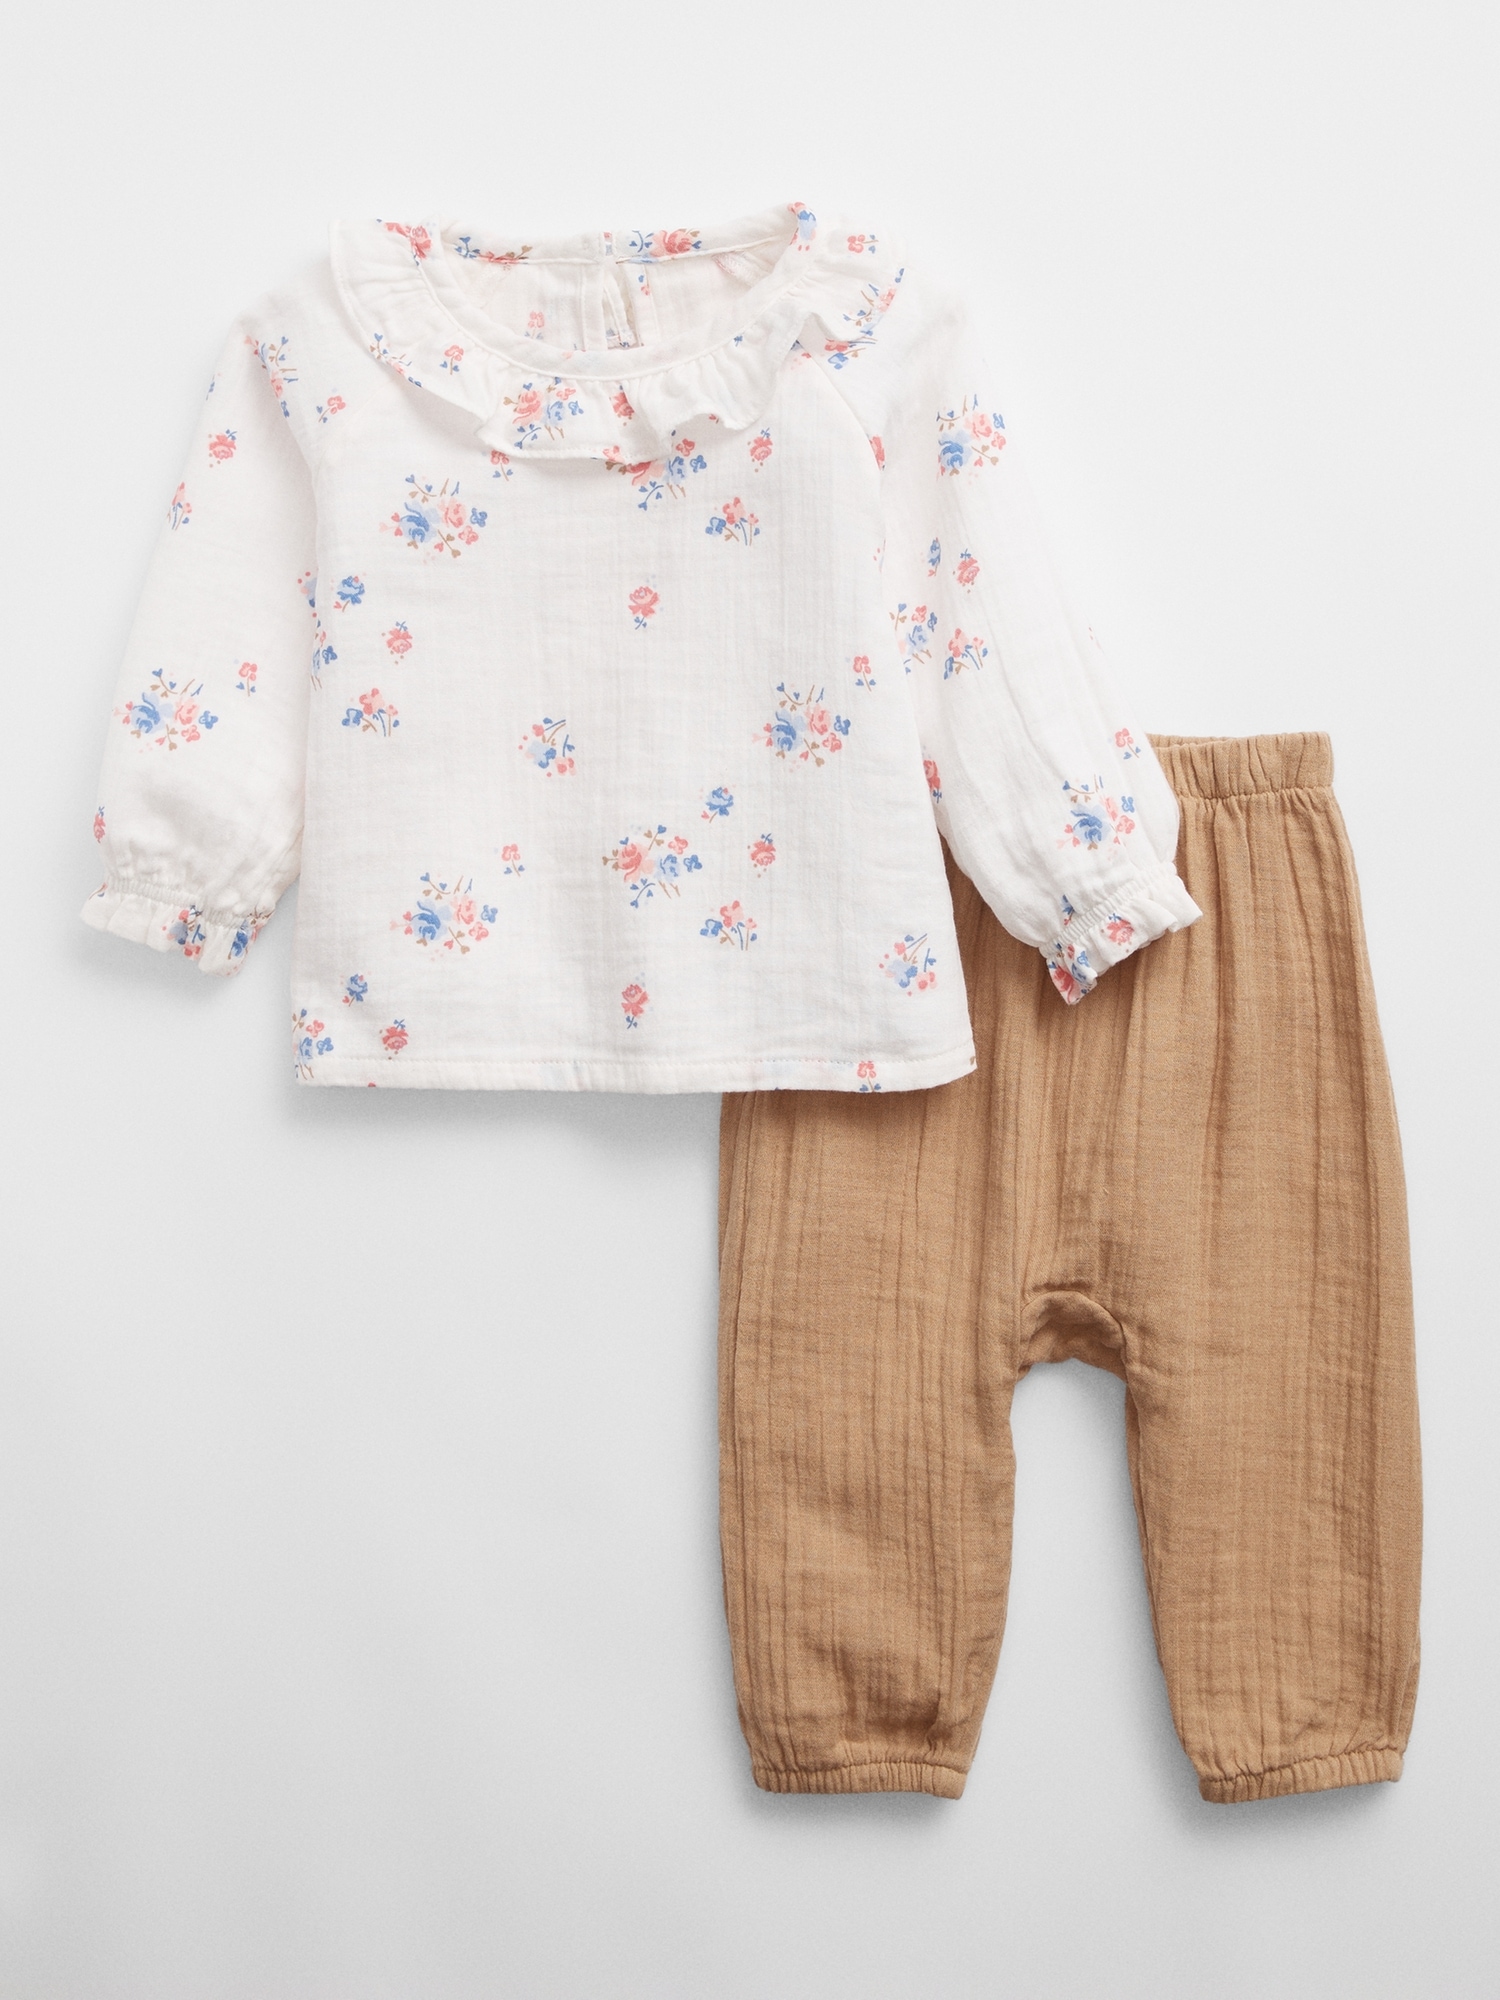 Baby Gauze Outfit Set | Gap Factory